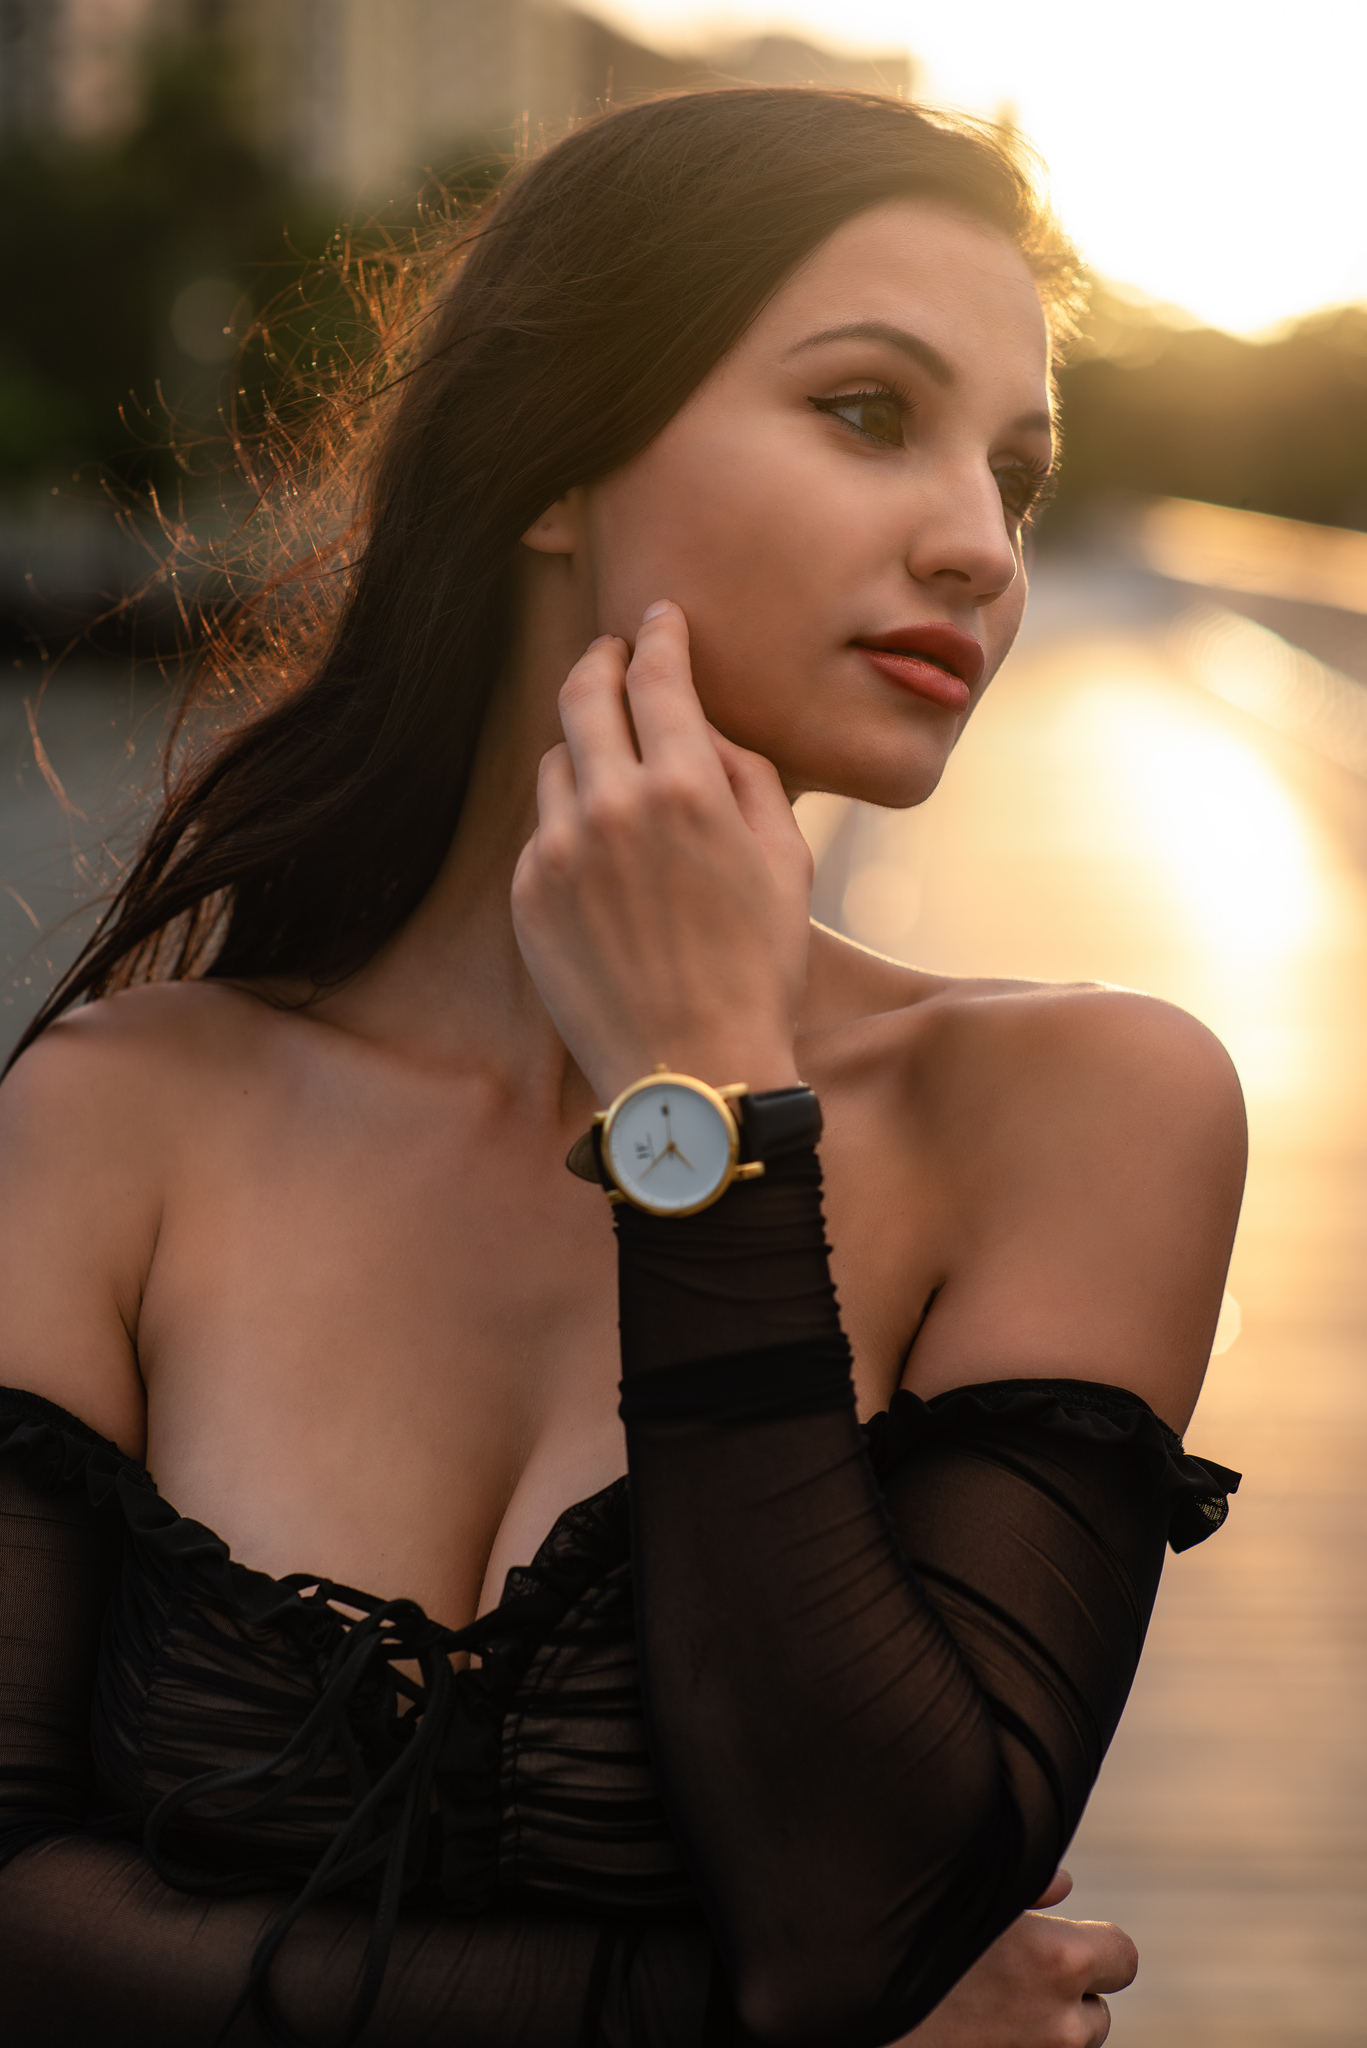 People 1367x2048 Jenna Glamour women model brunette brown eyes looking away touching face watch bare shoulders dress black dress backlighting sunset outdoors depth of field portrait display face cleavage women outdoors Christopher Rankin lace up top